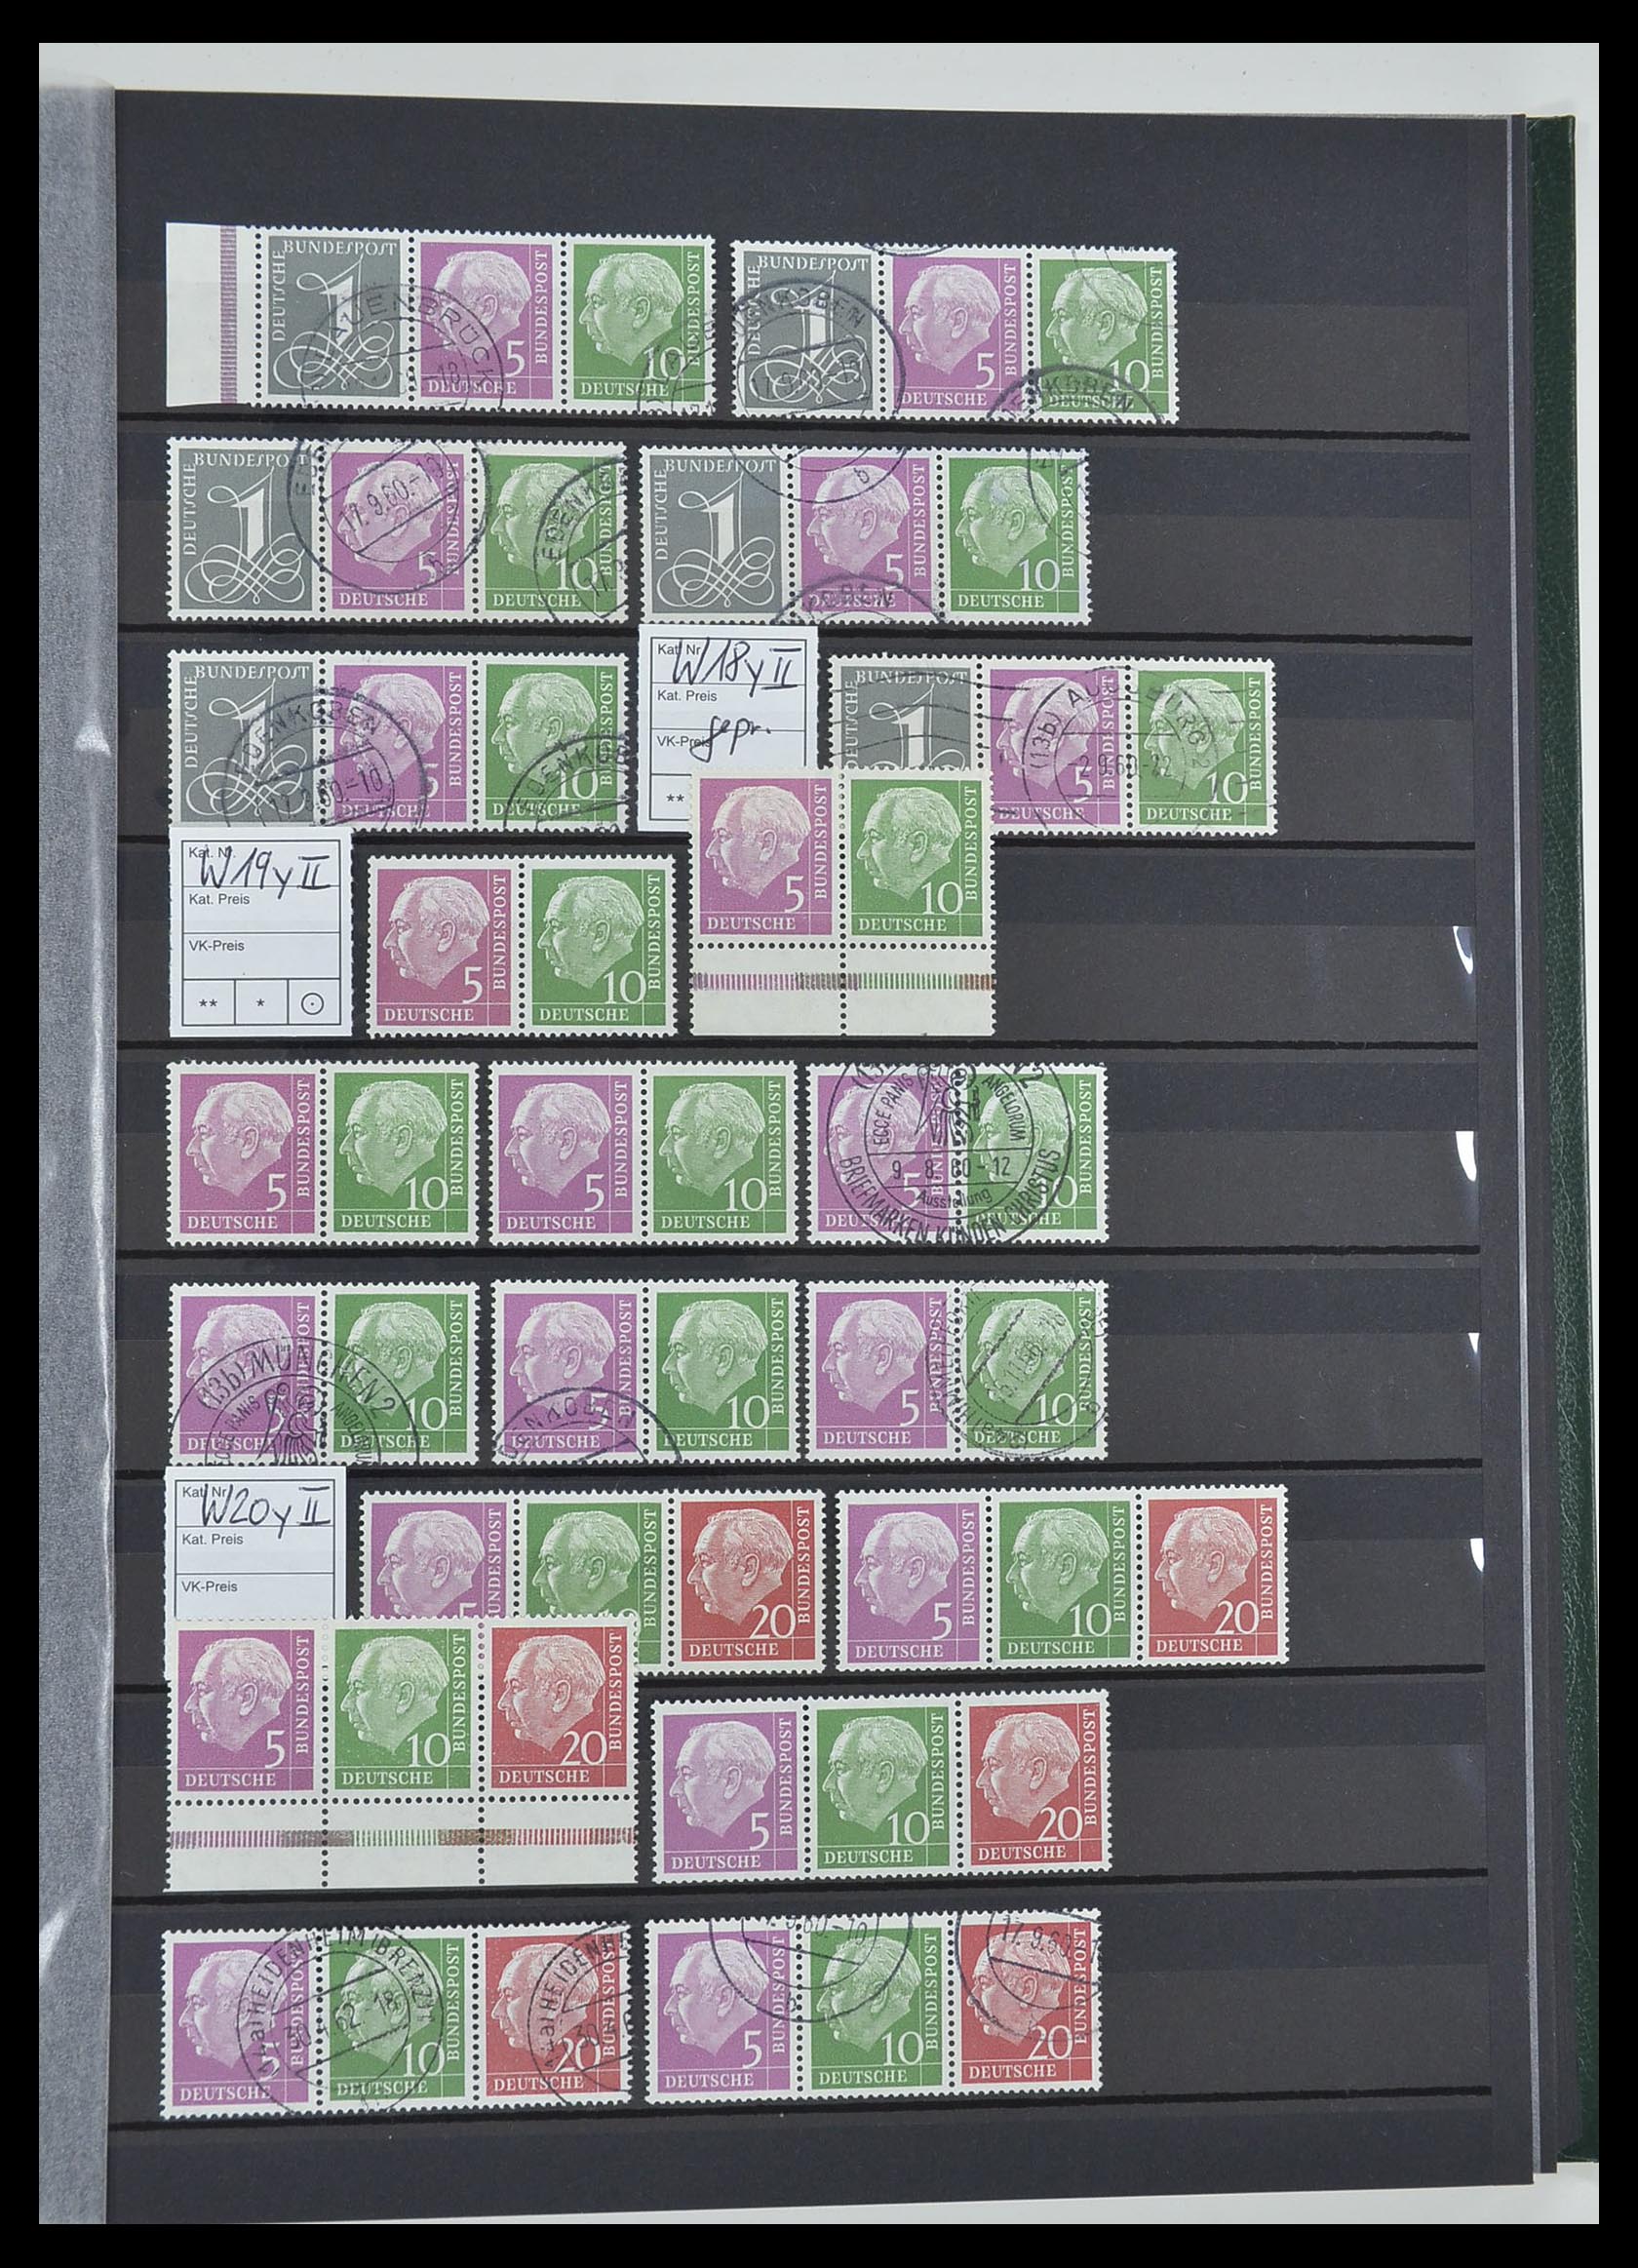 33275 029 - Stamp collection 33275 Bundespost combinations 1951-1960.